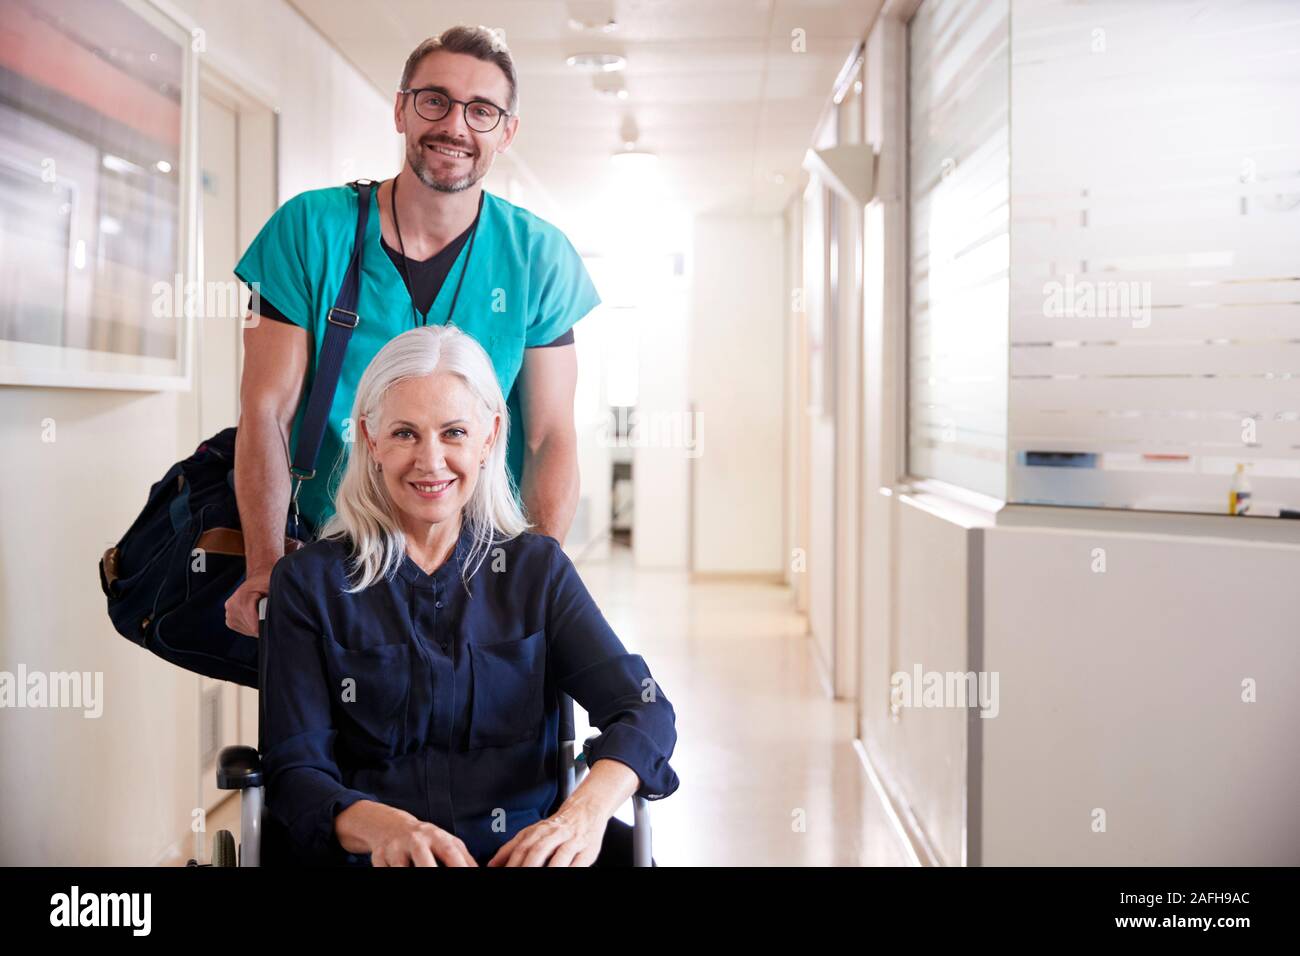 Male Orderly Pushing Senior Female Patient Being Discharged From Hospital In Wheelchair Stock Photo